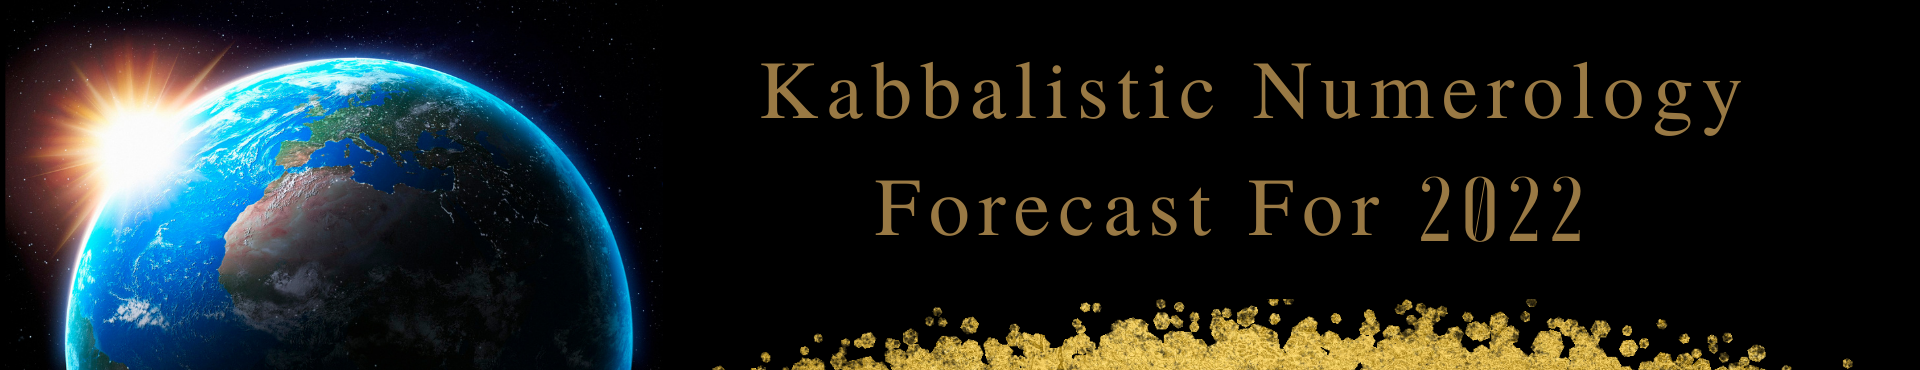 Kabbalistic Numerology Forecast, Dr. Theresa